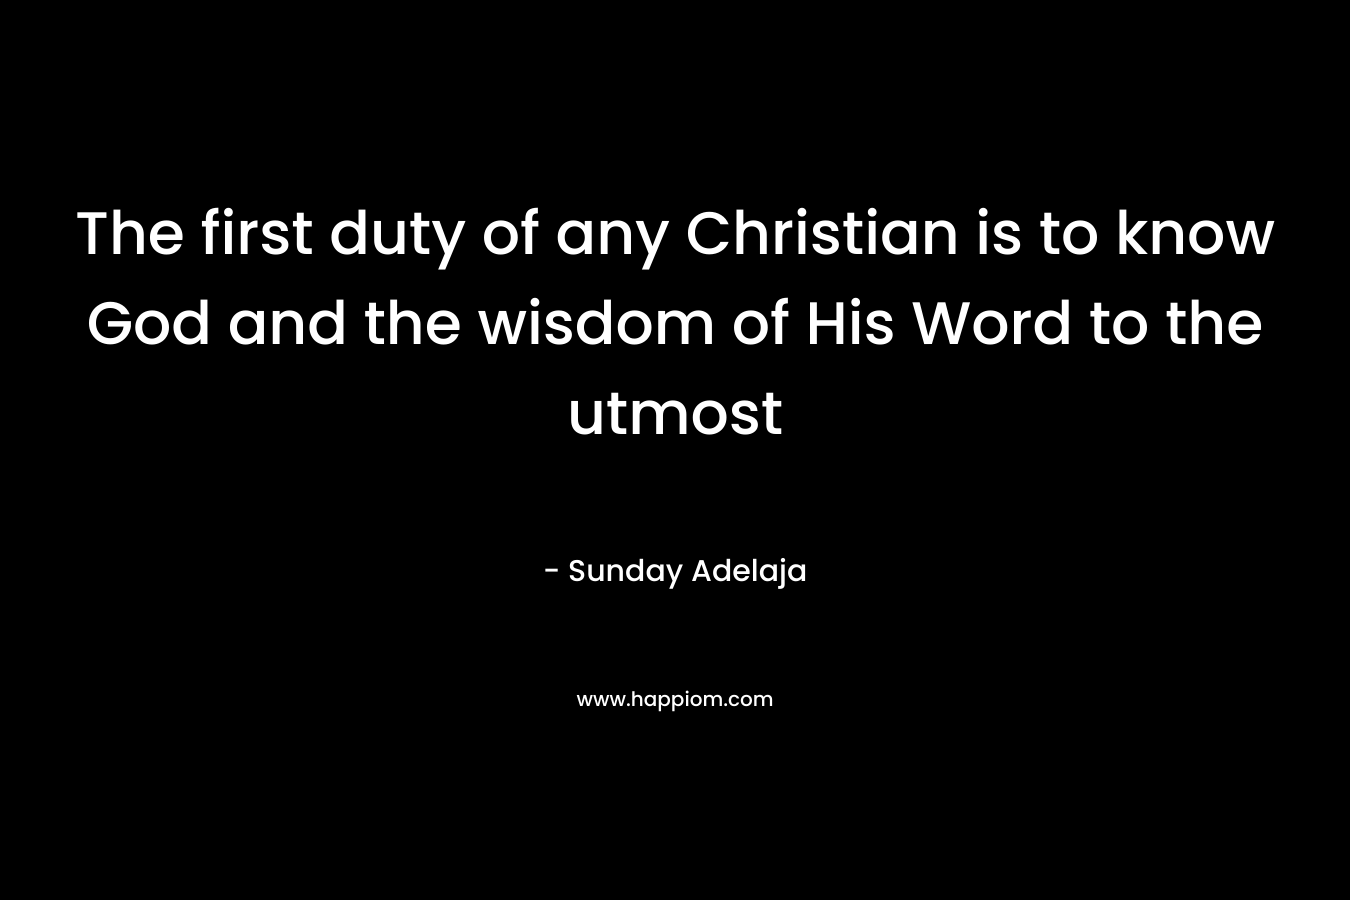 The first duty of any Christian is to know God and the wisdom of His Word to the utmost